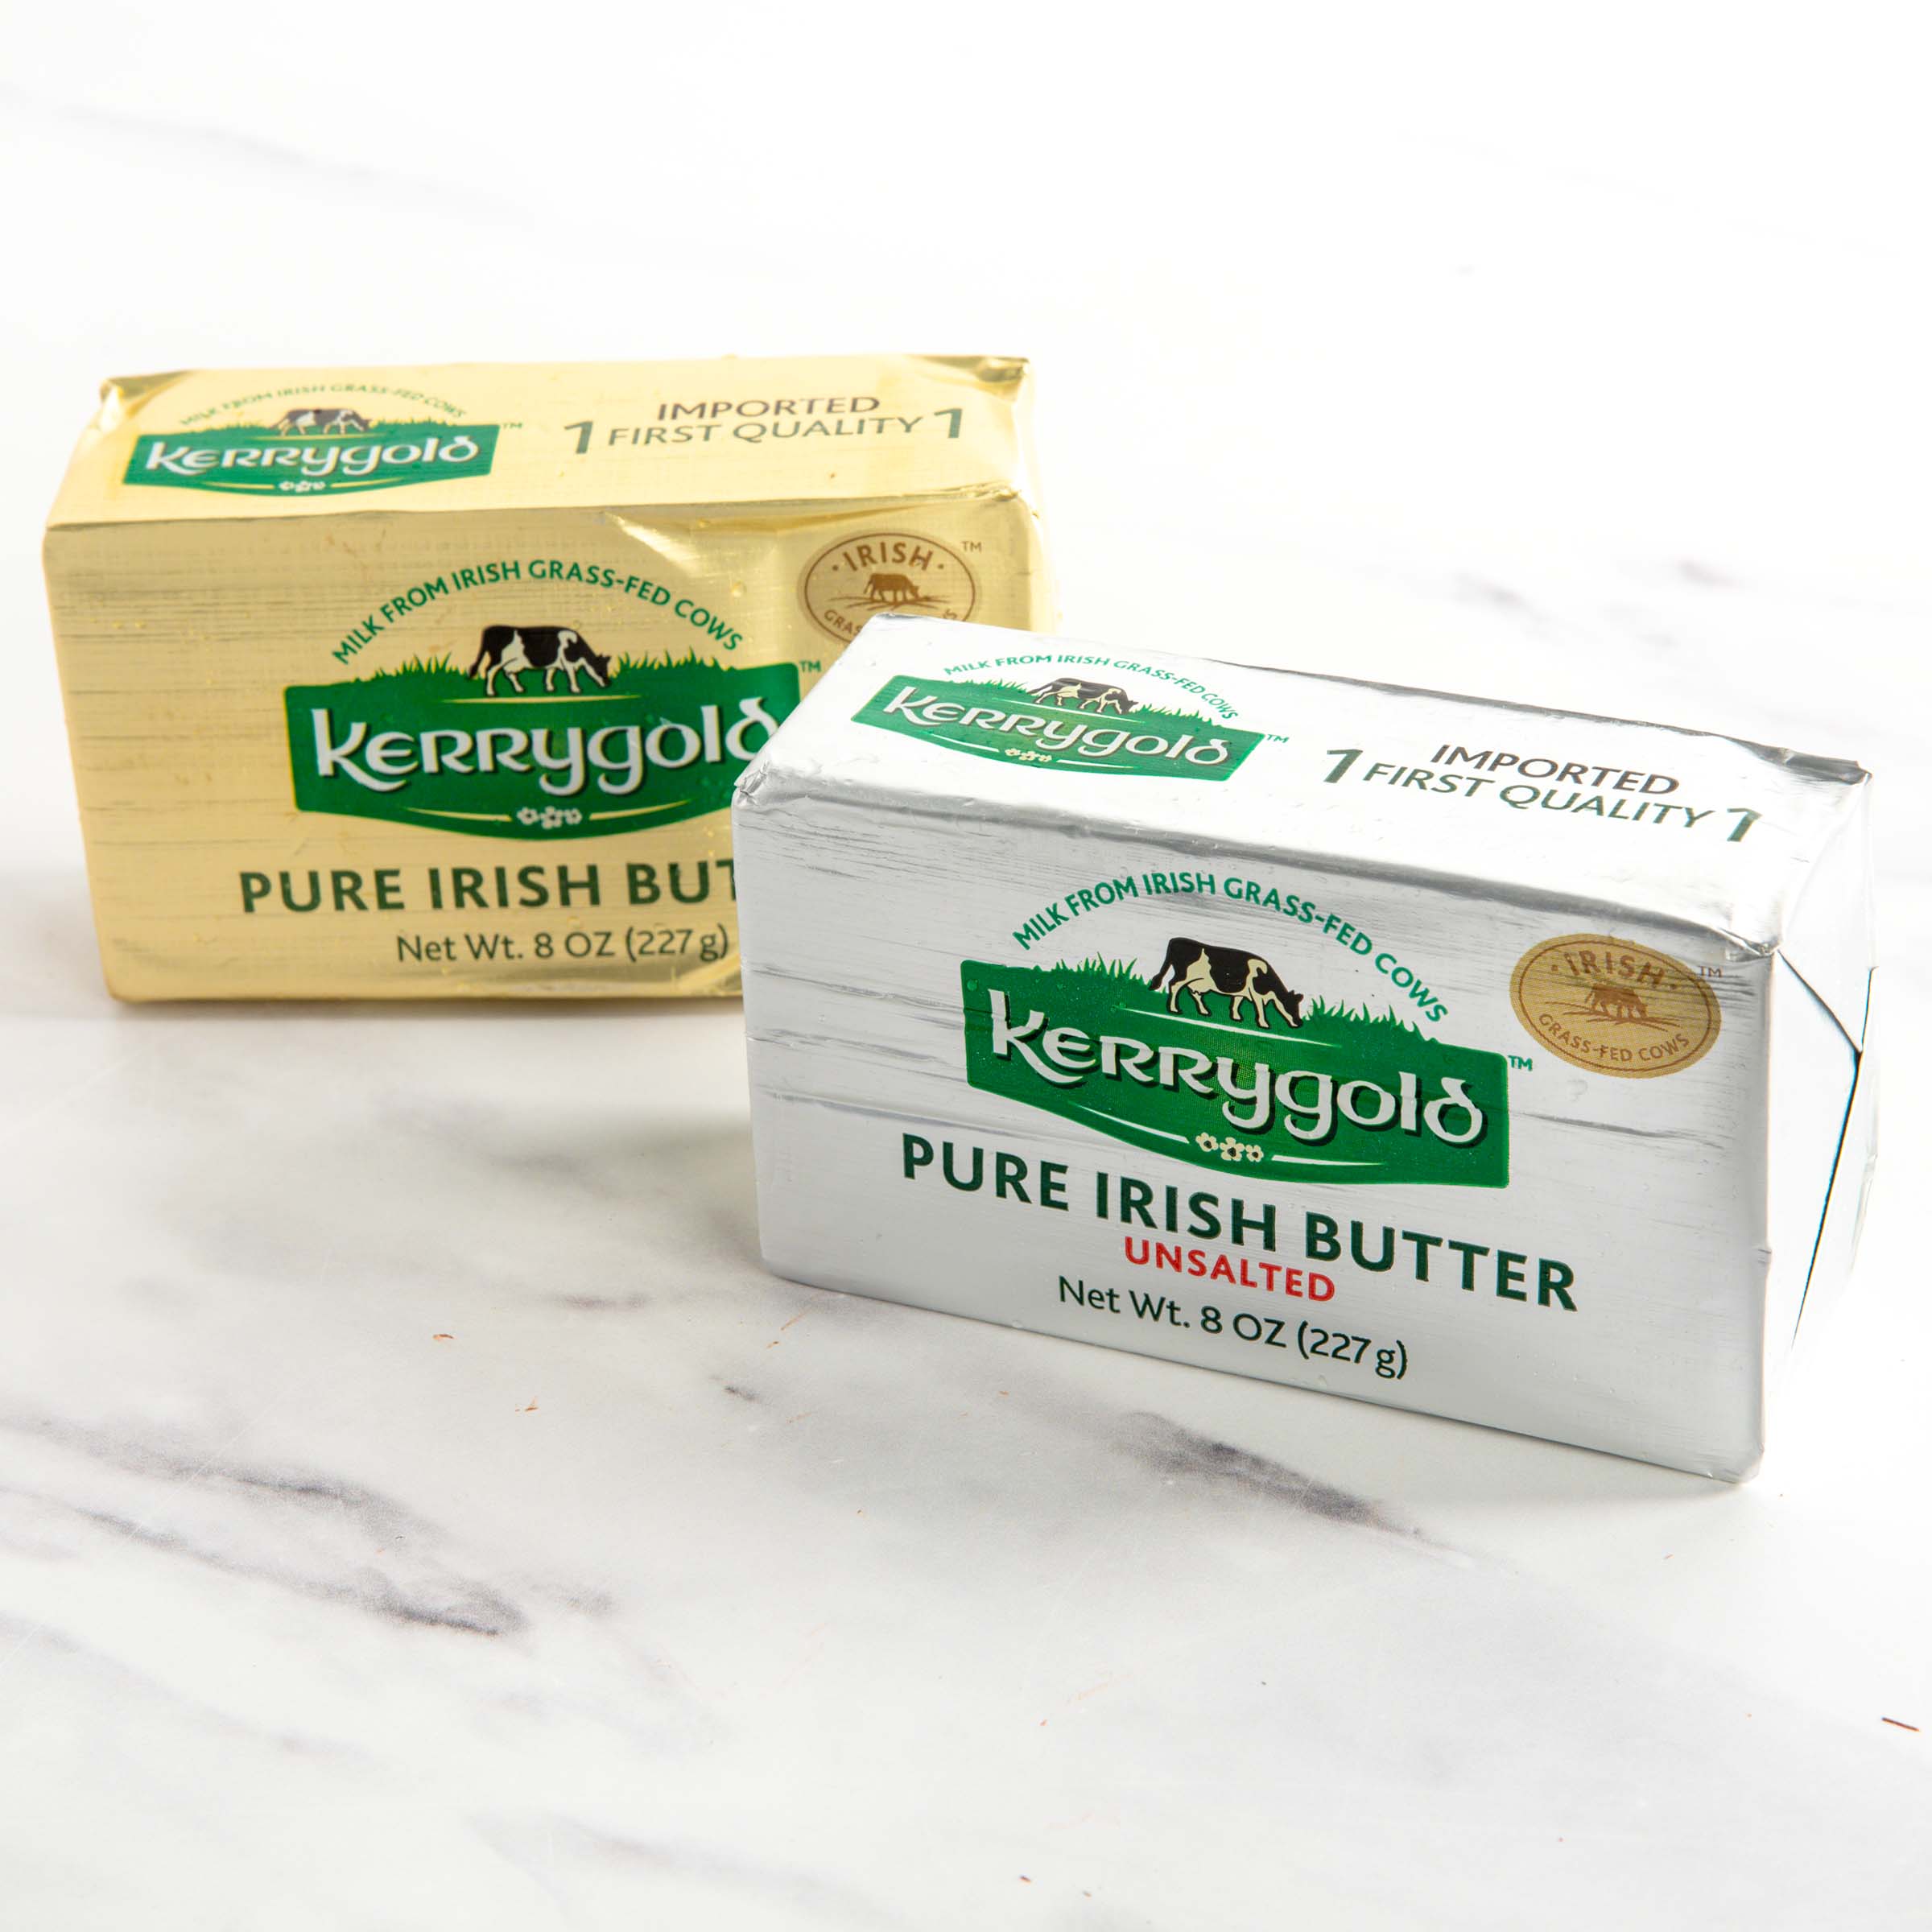 Pure Irish Grass-fed Salted Butter Sticks, 16oz at Whole Foods Market